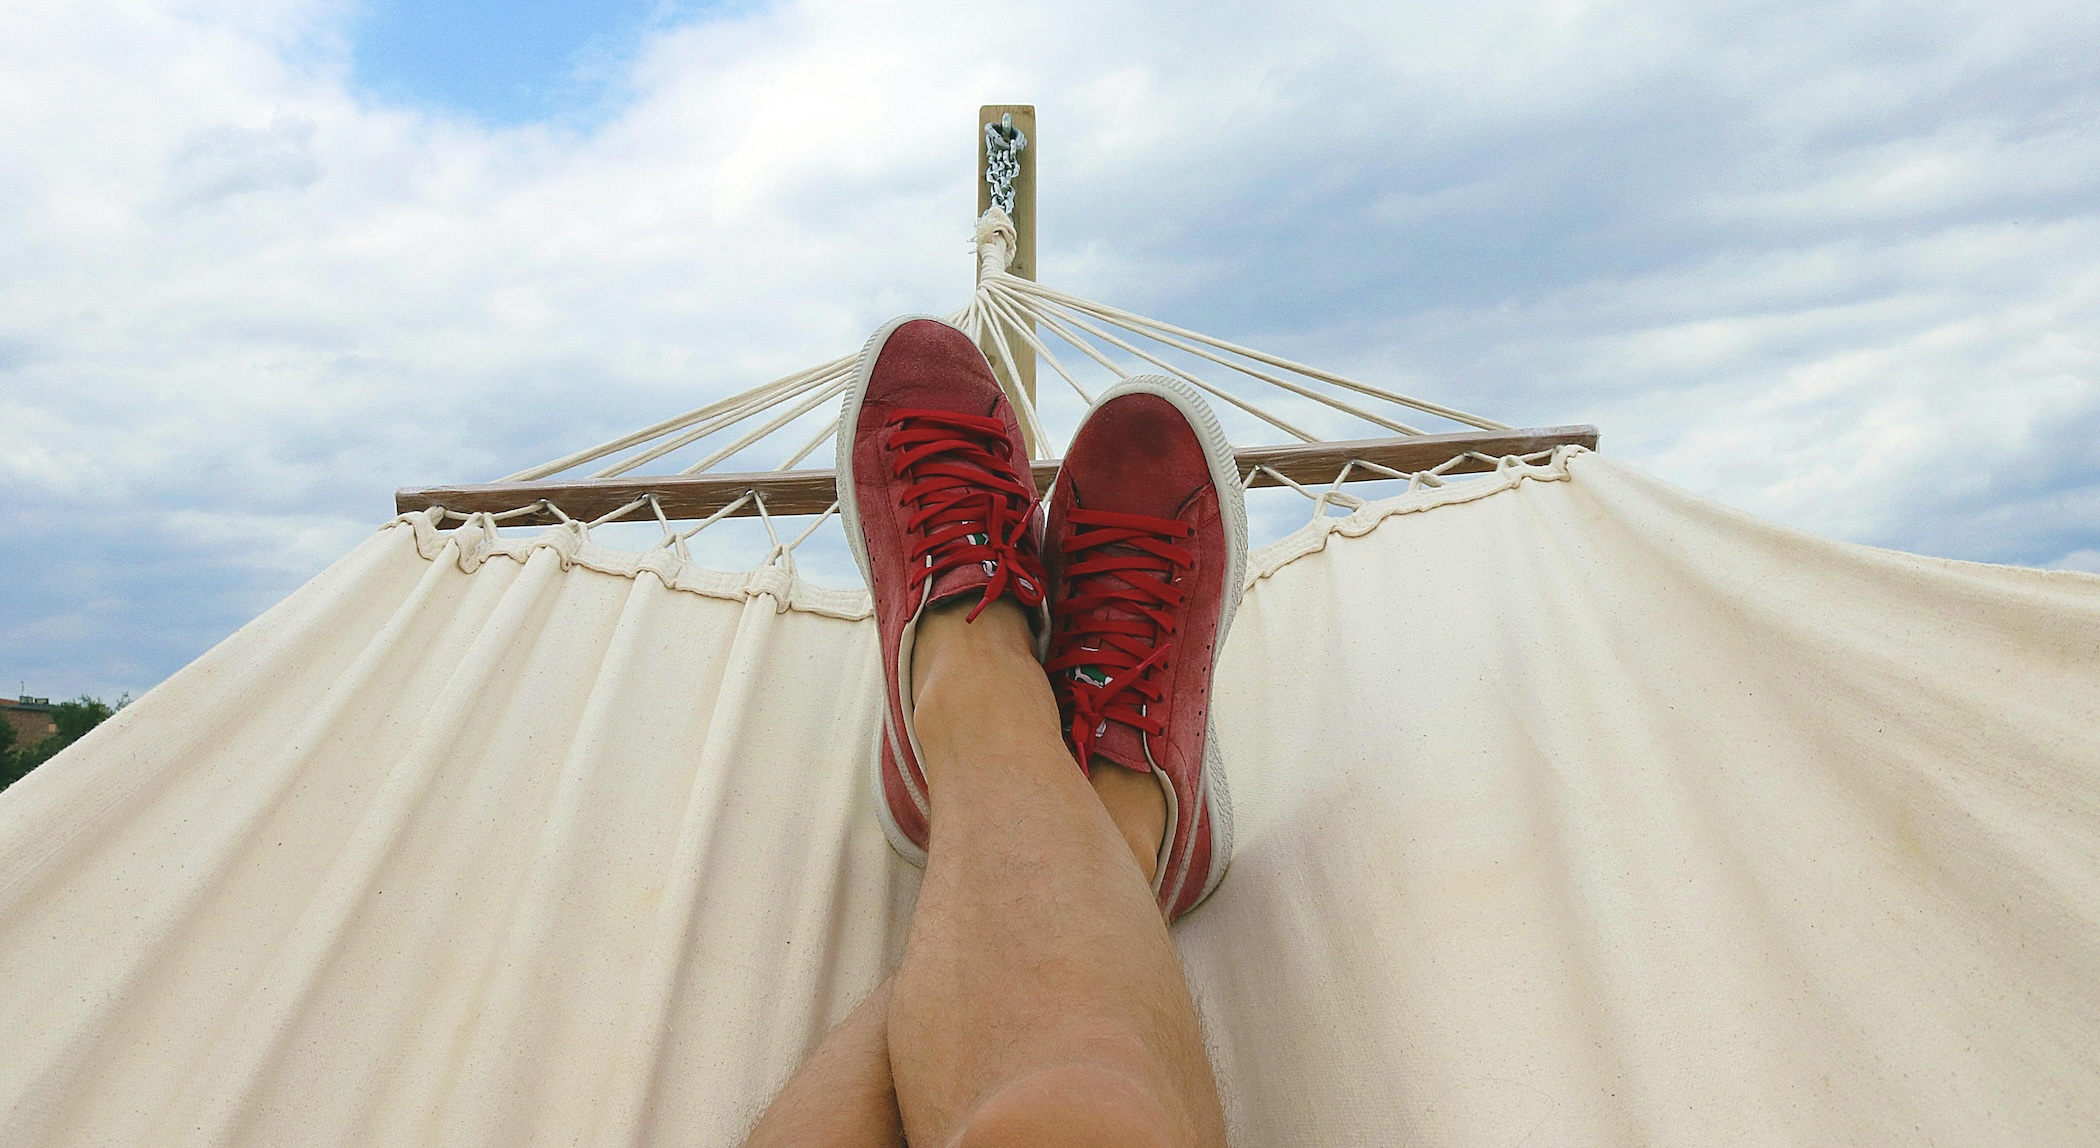 Person wearing red sneakers reclines their feet in a hammock with a cloudy blue sky in the background.